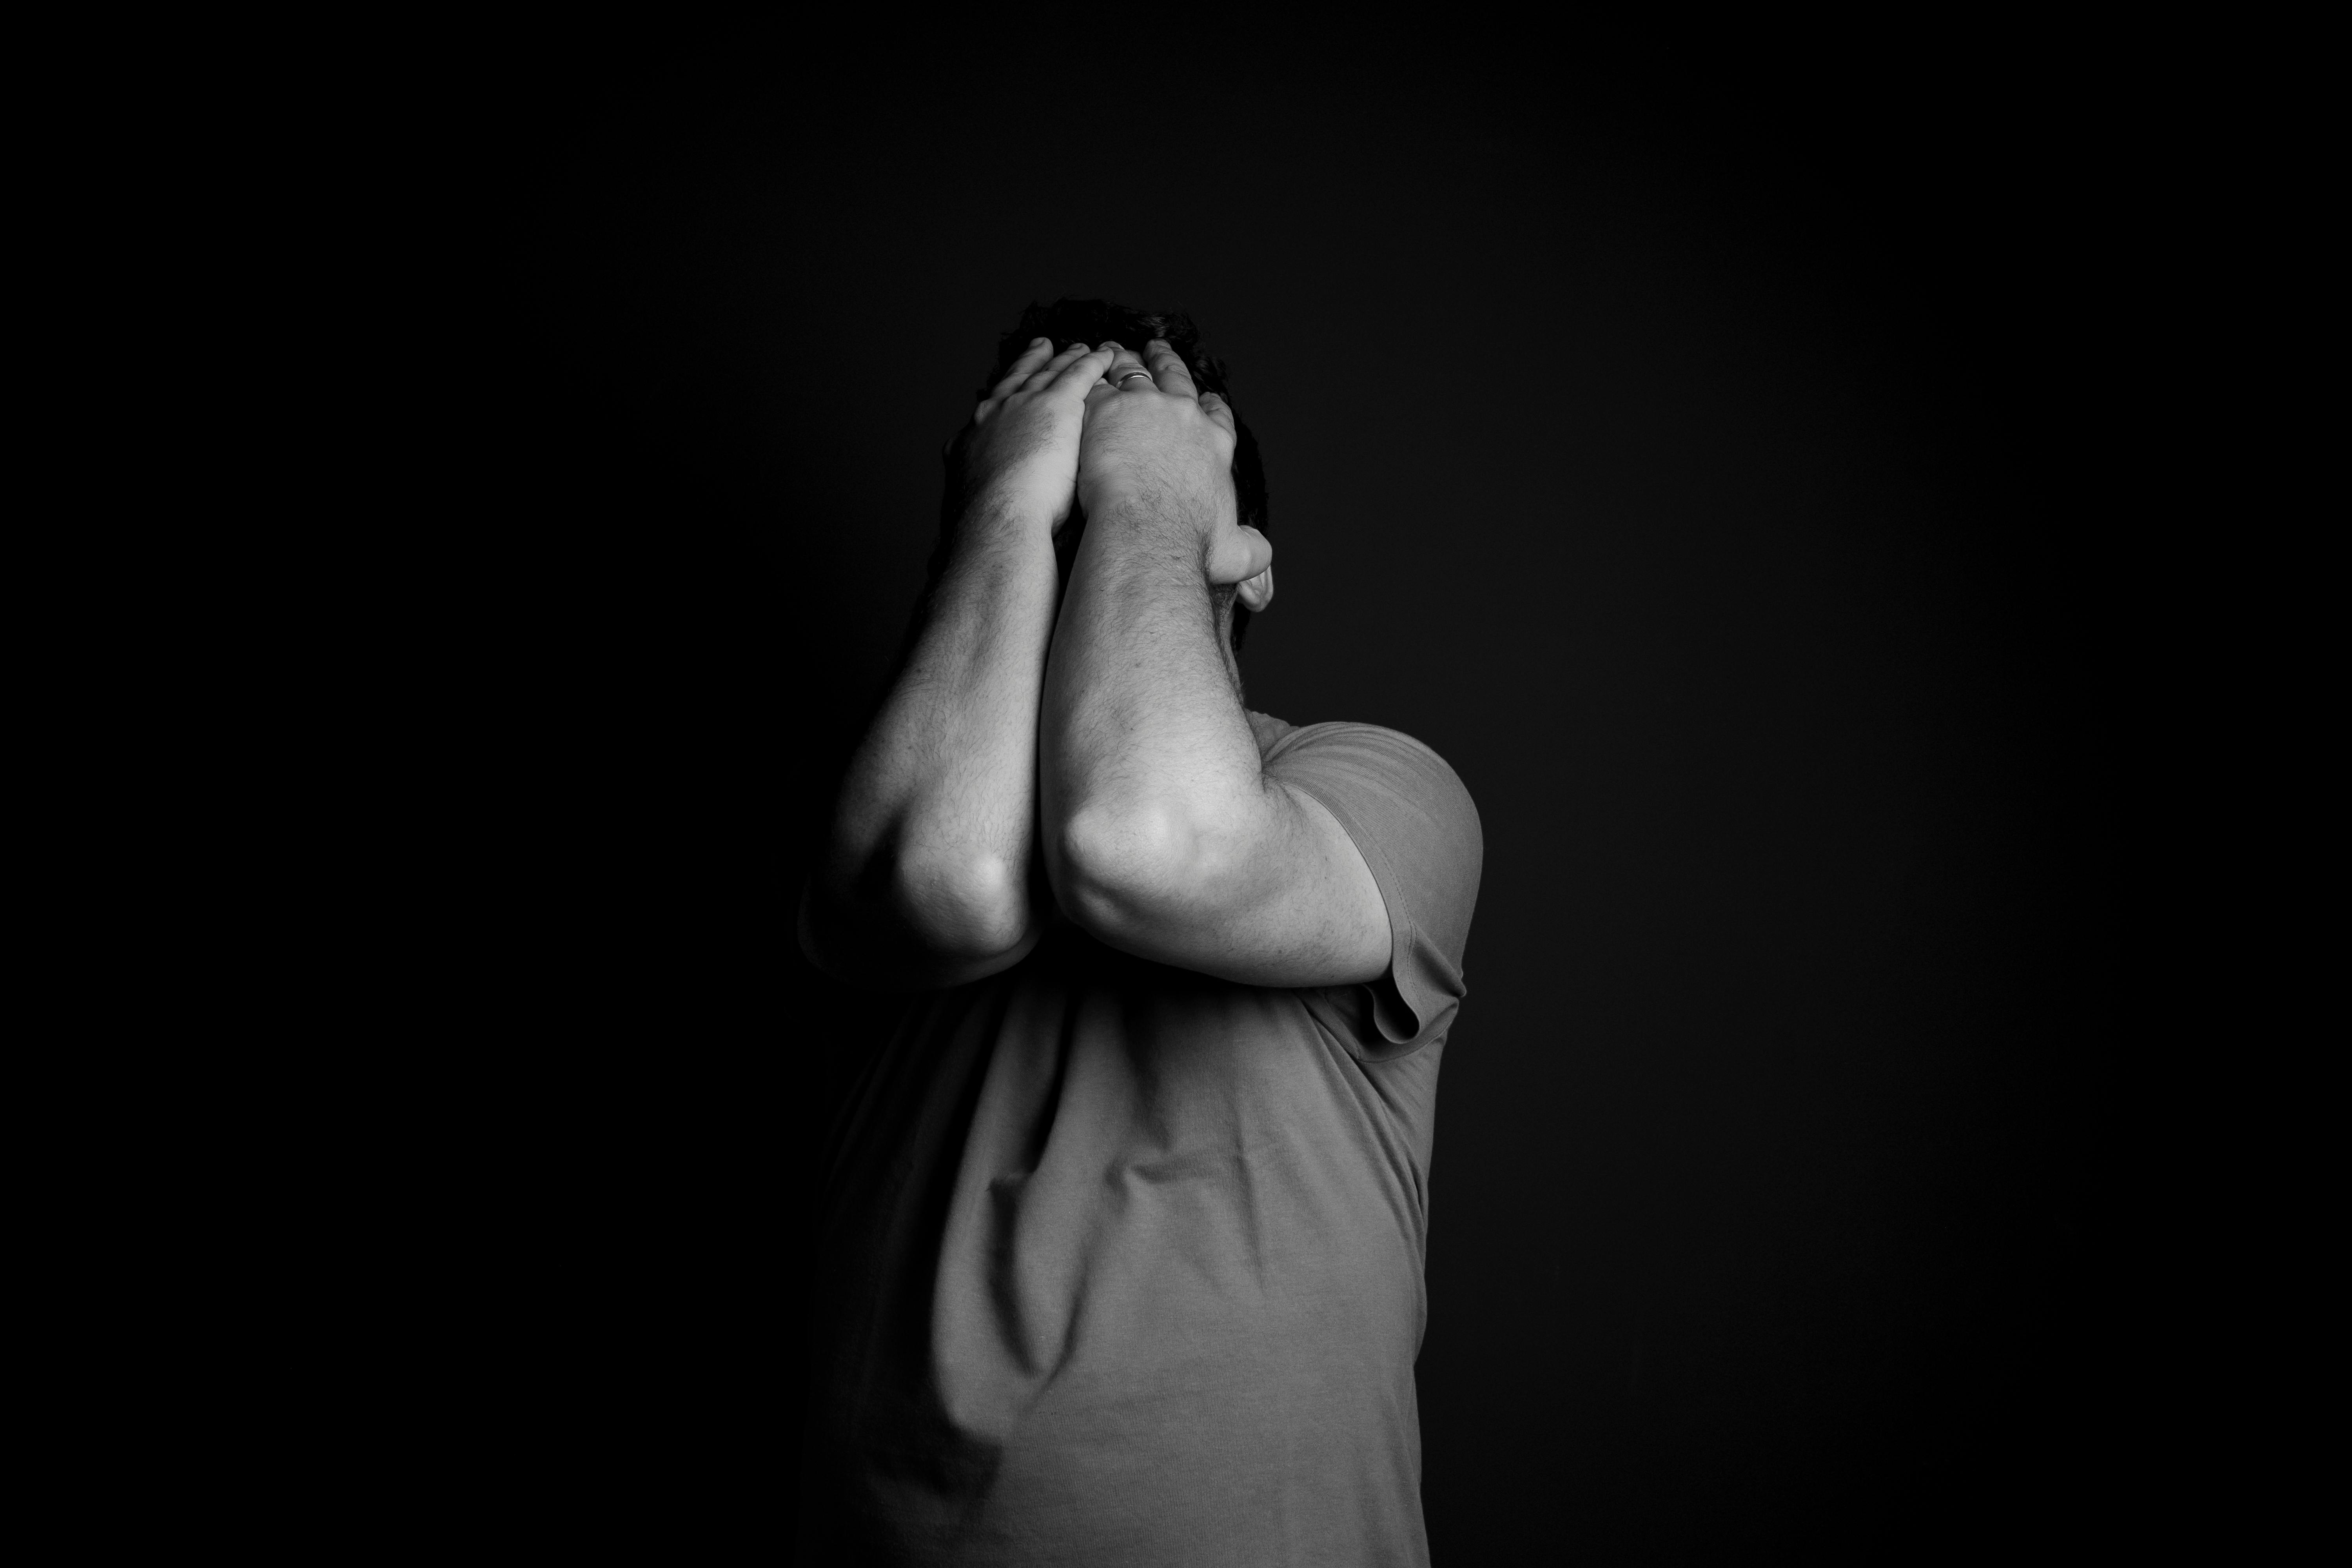 An emotional man covering his face with his hands | Source: Pexels